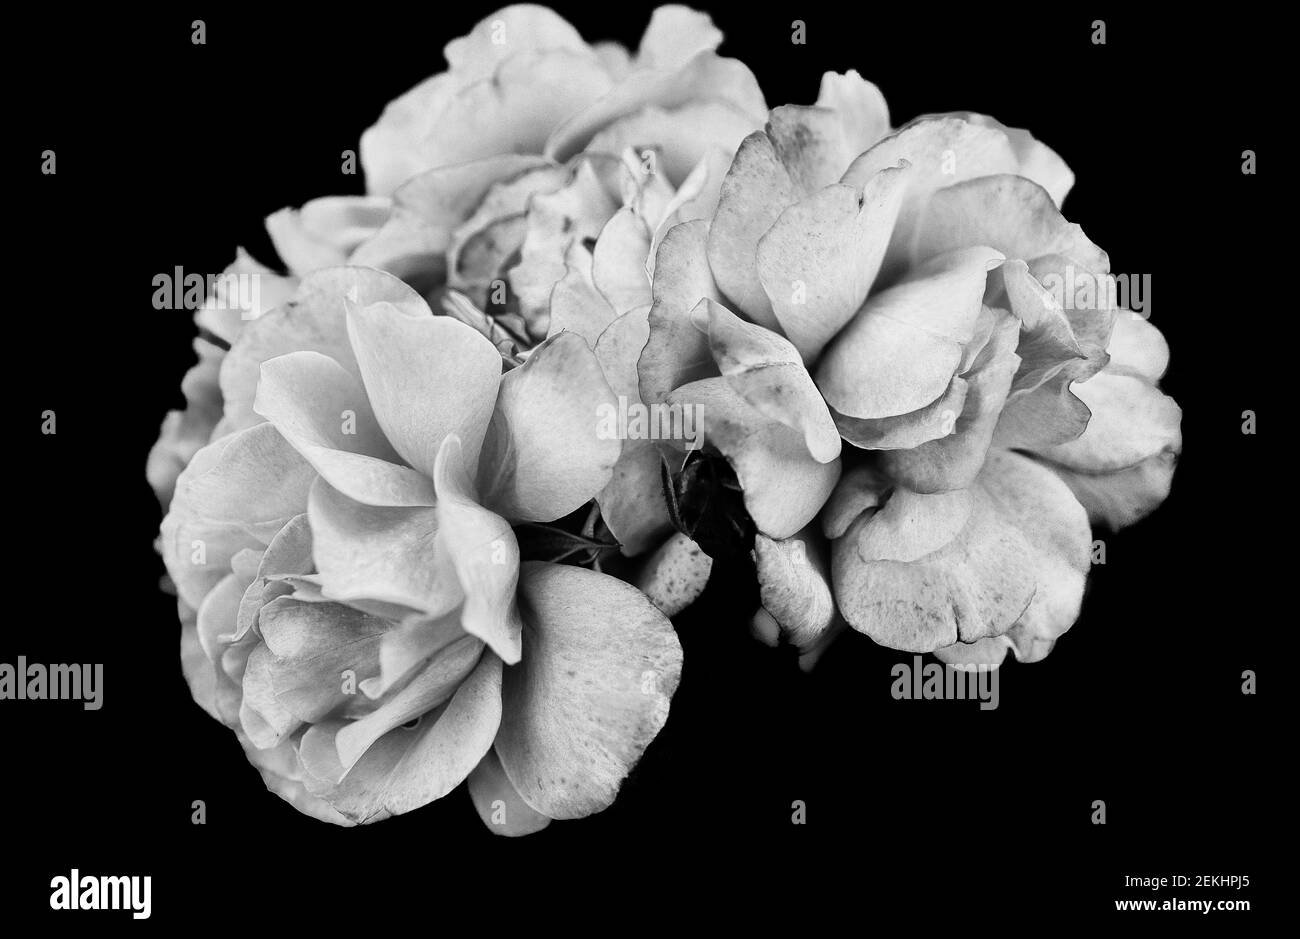 Close-up of black and white group of roses against black background Stock Photo